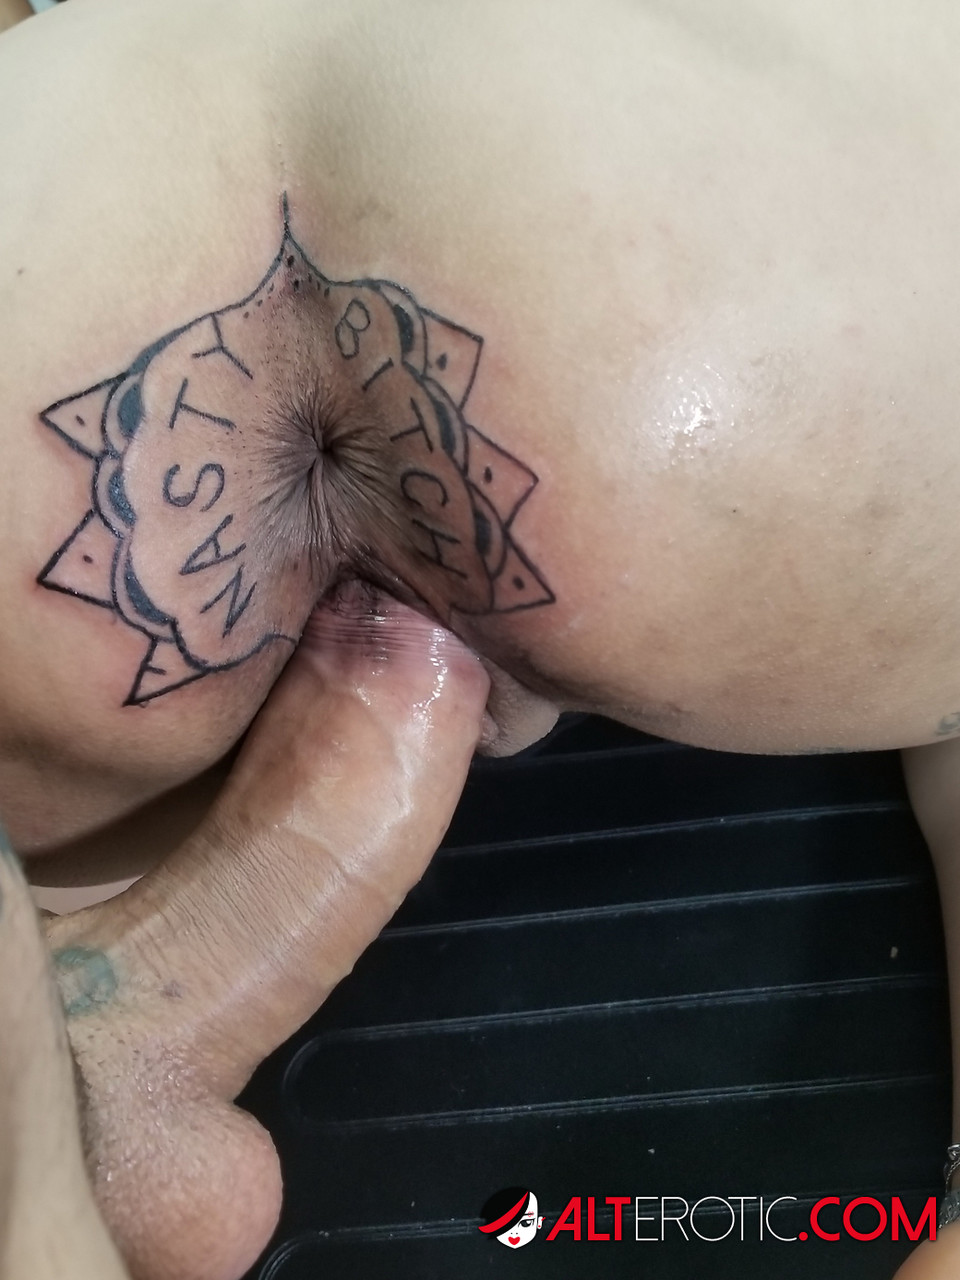 Latina chick Kitty Jaguar gets a butt tattoo before being fucked foto porno #424168461